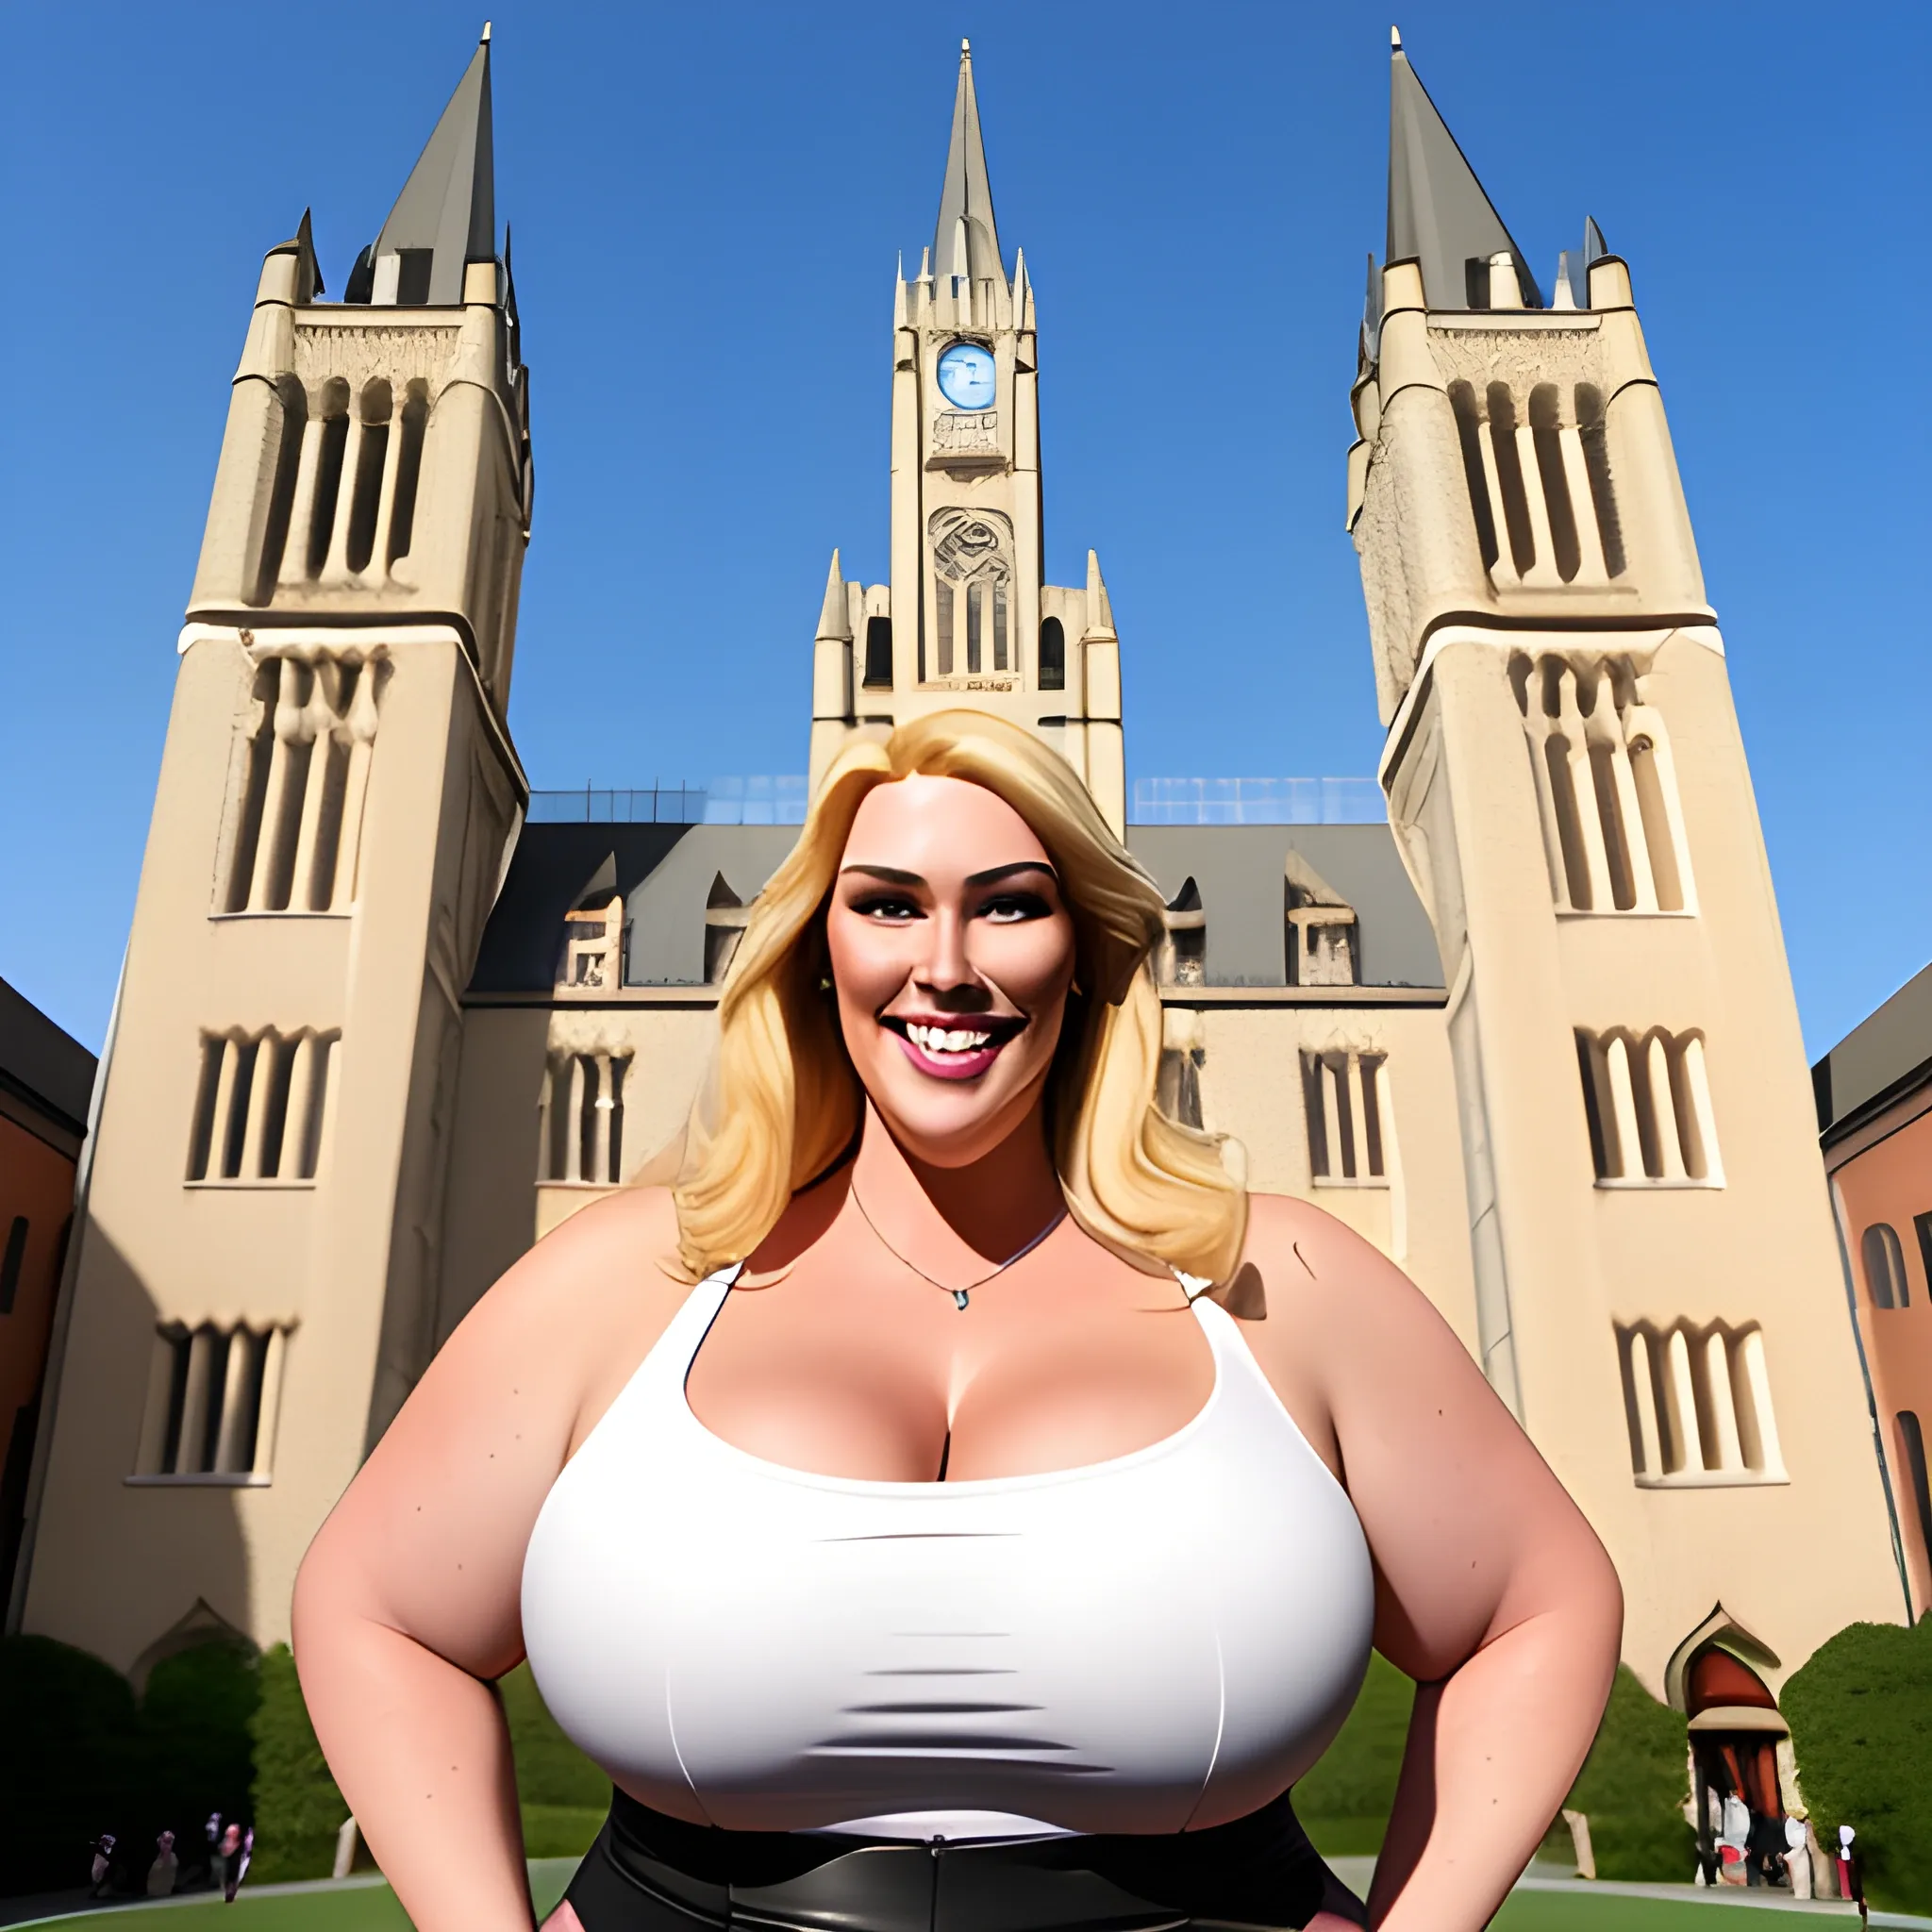 huge and very tall friendly blonde plus size girl with small head and broad shoulders, not curvy but massive, on busy schoolyard towerring with gentle smile among other students and teachers 